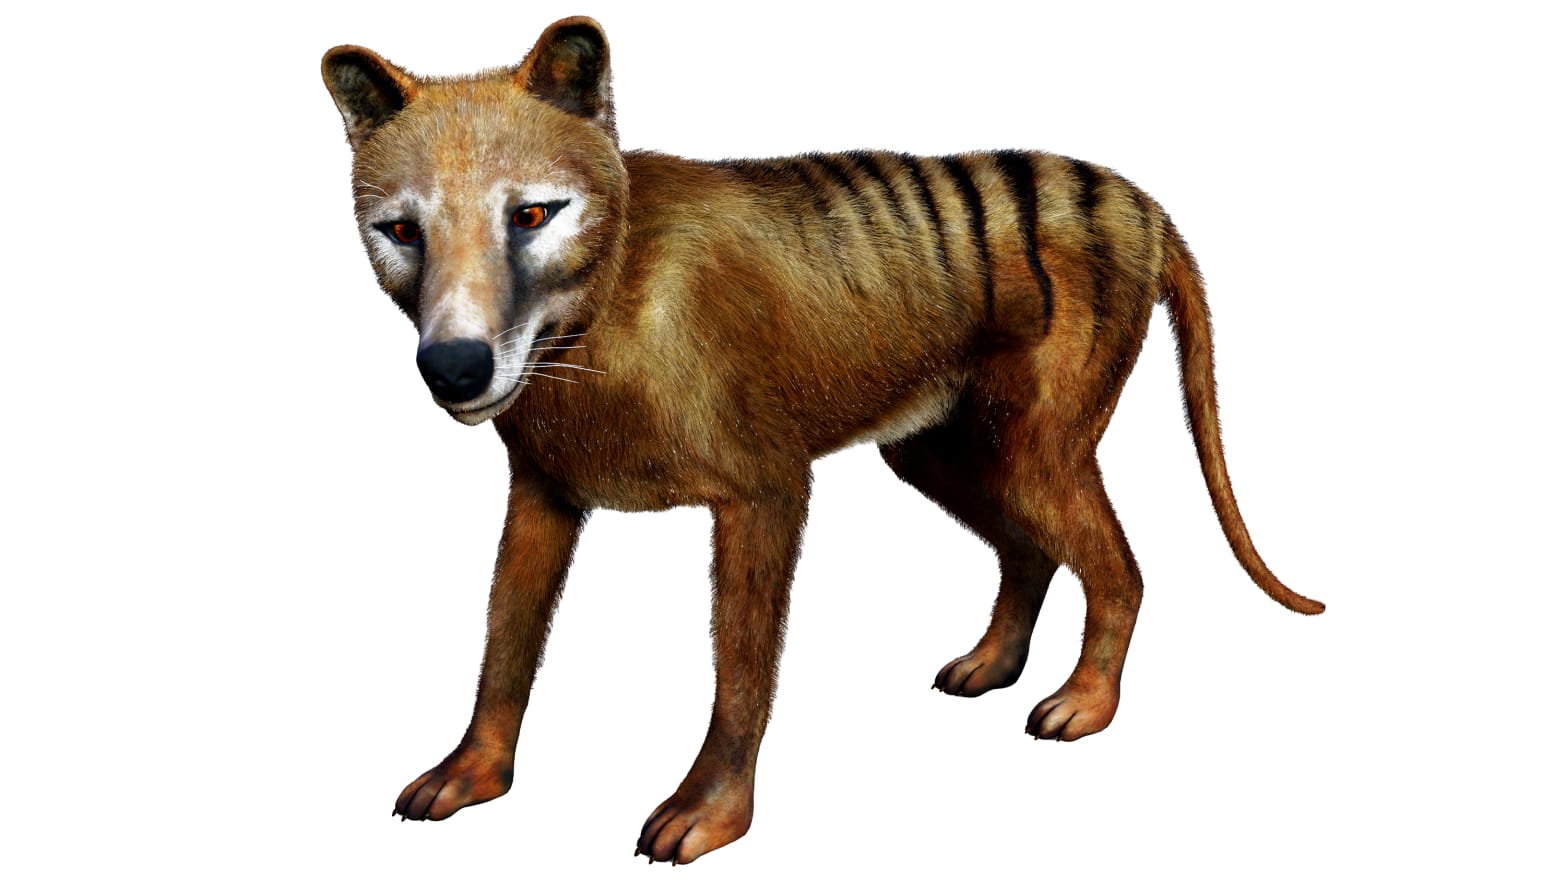 Tasmanian Tigers Are Extinct. Why Do People Keep Seeing Them